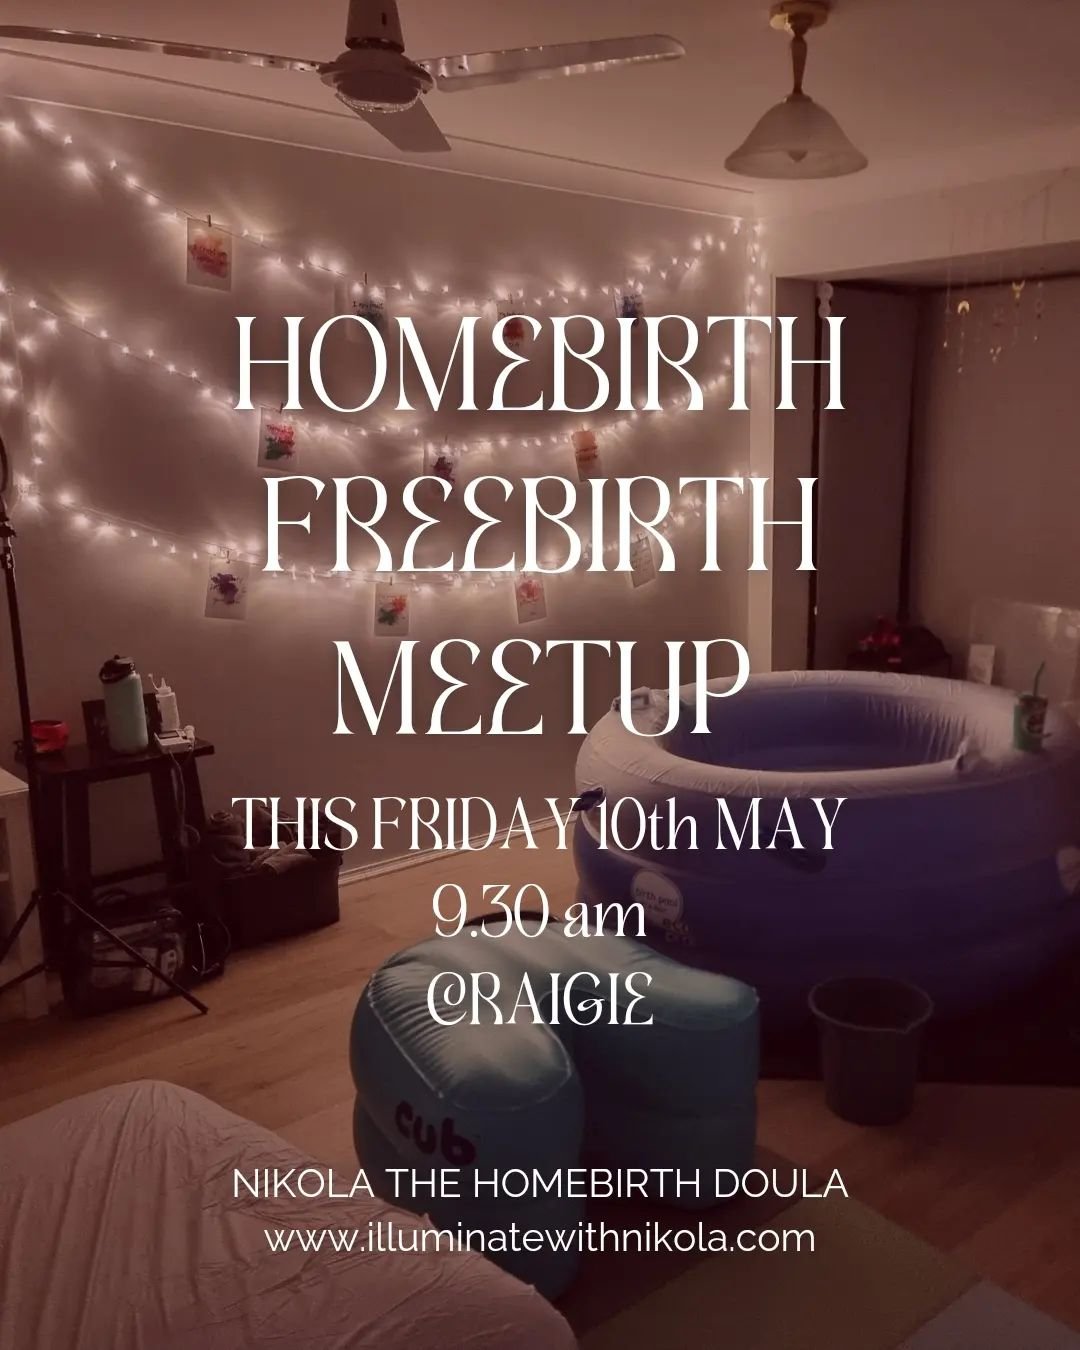 Whether you're planning a homebirth, a freebirth or you've recently had one, you're invited to come round and chill with some likeminded mummas, plus ask a Doula &amp; IBCLC any questions you have

We have moved to a private residence due to the whet